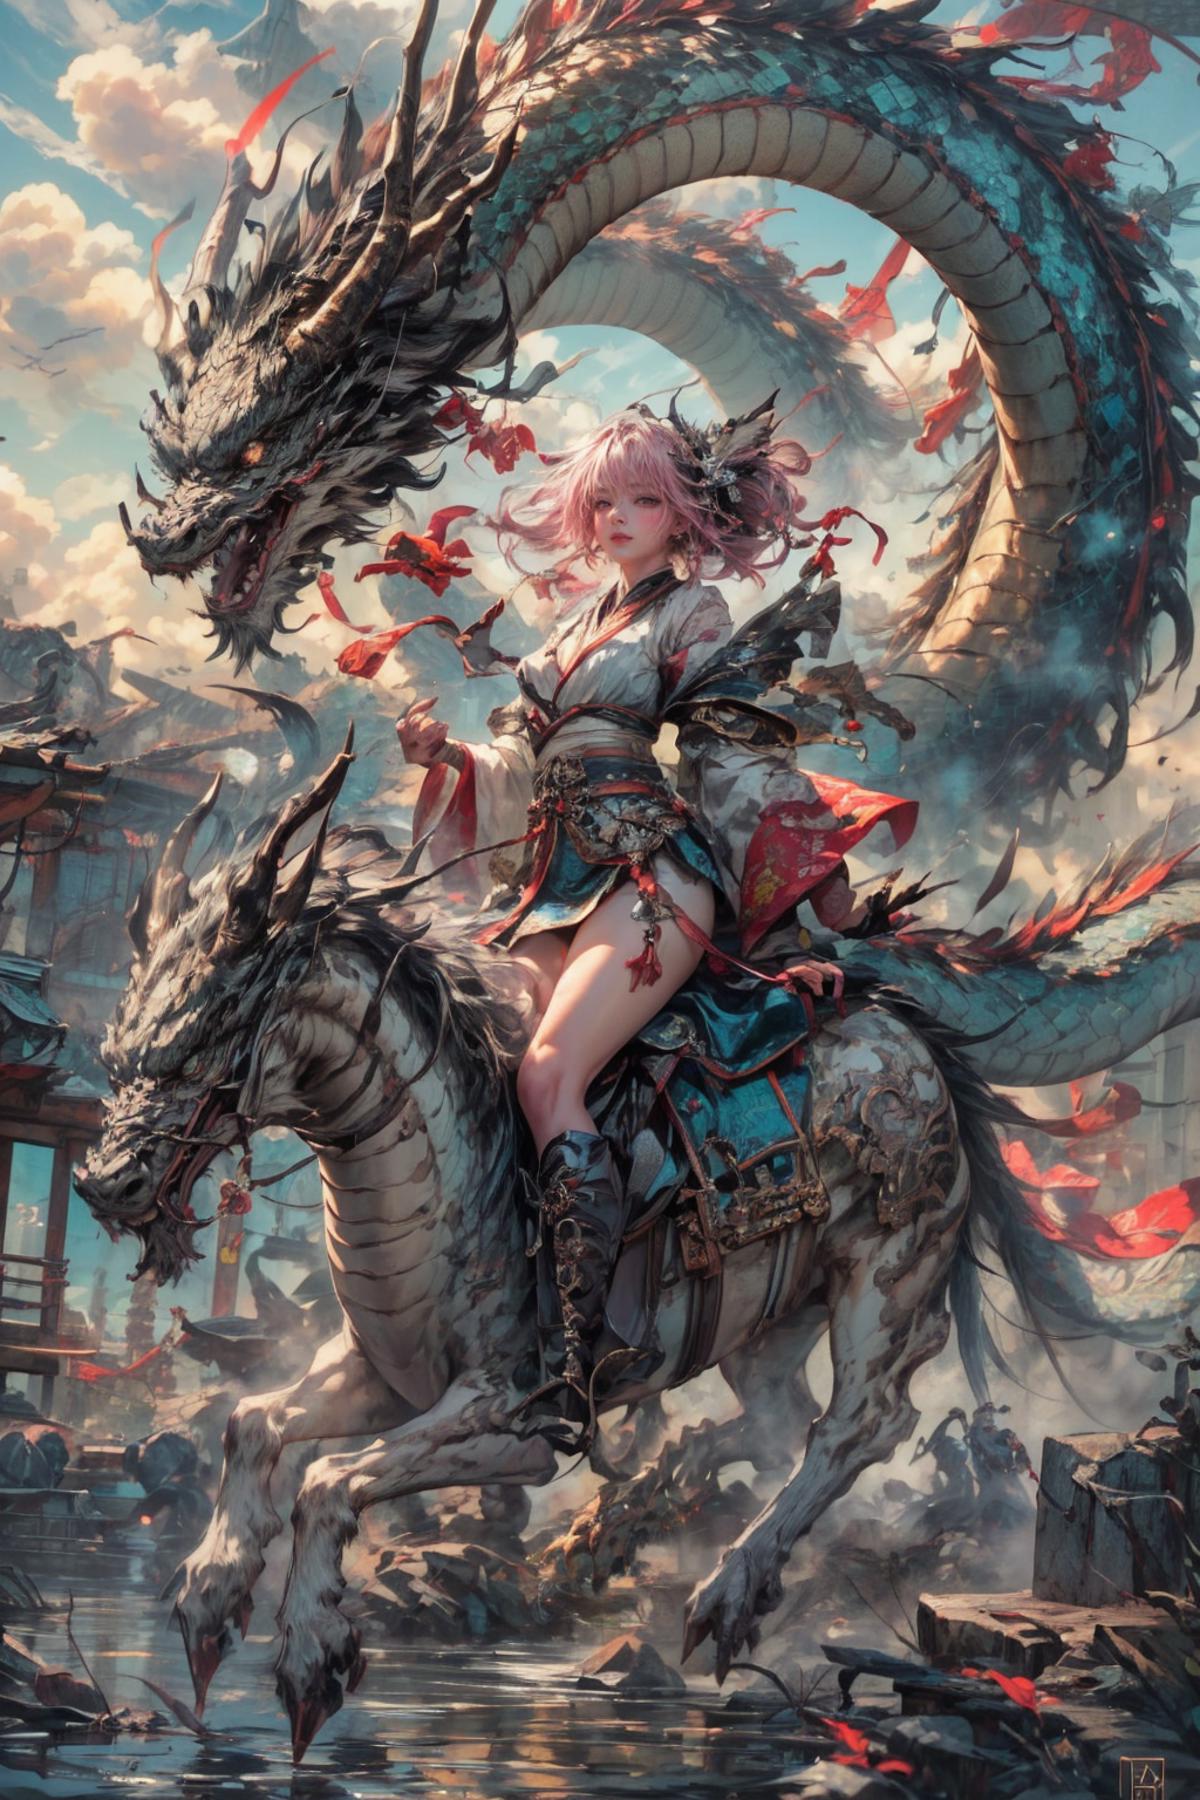 [LoRa] Riding Monster/怪獣騎士 Concept image by yoyochen2023